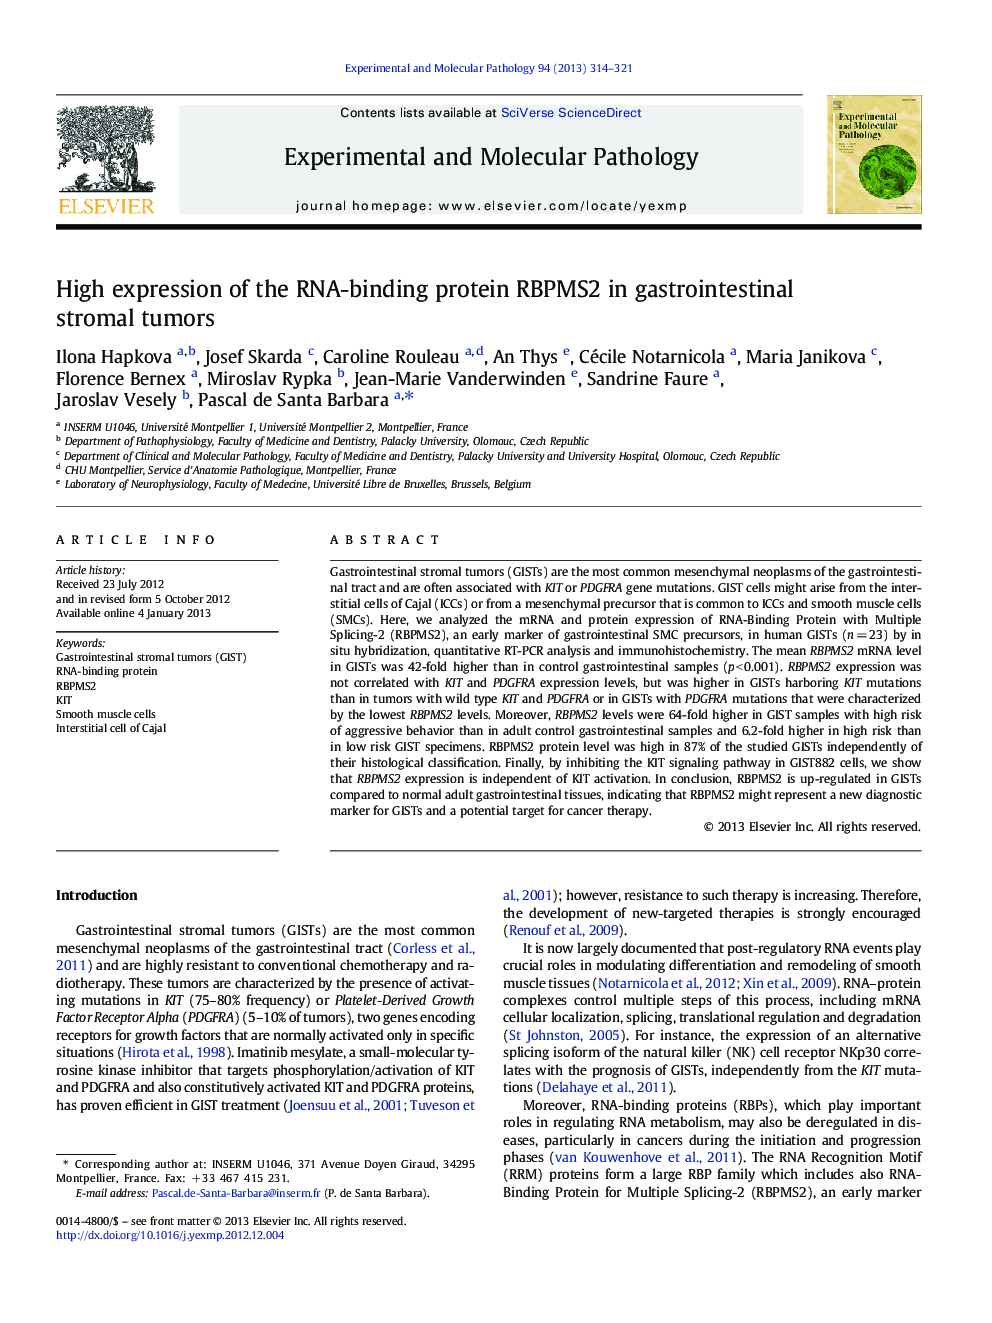 High expression of the RNA-binding protein RBPMS2 in gastrointestinal stromal tumors